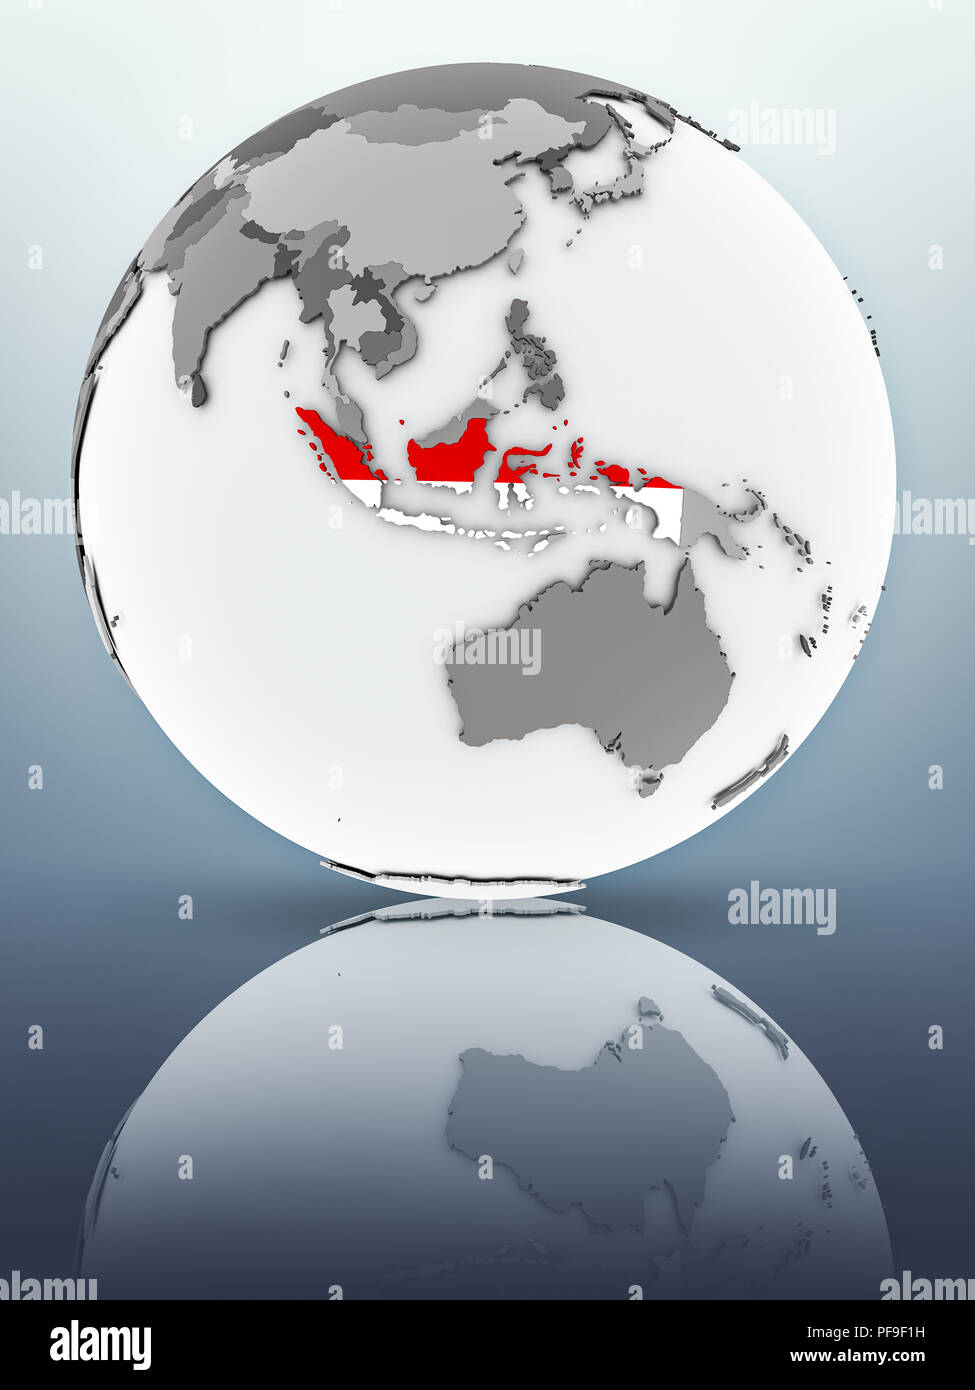 Indonesia with flag on globe reflecting on surface. 3D illustration. Stock Photo